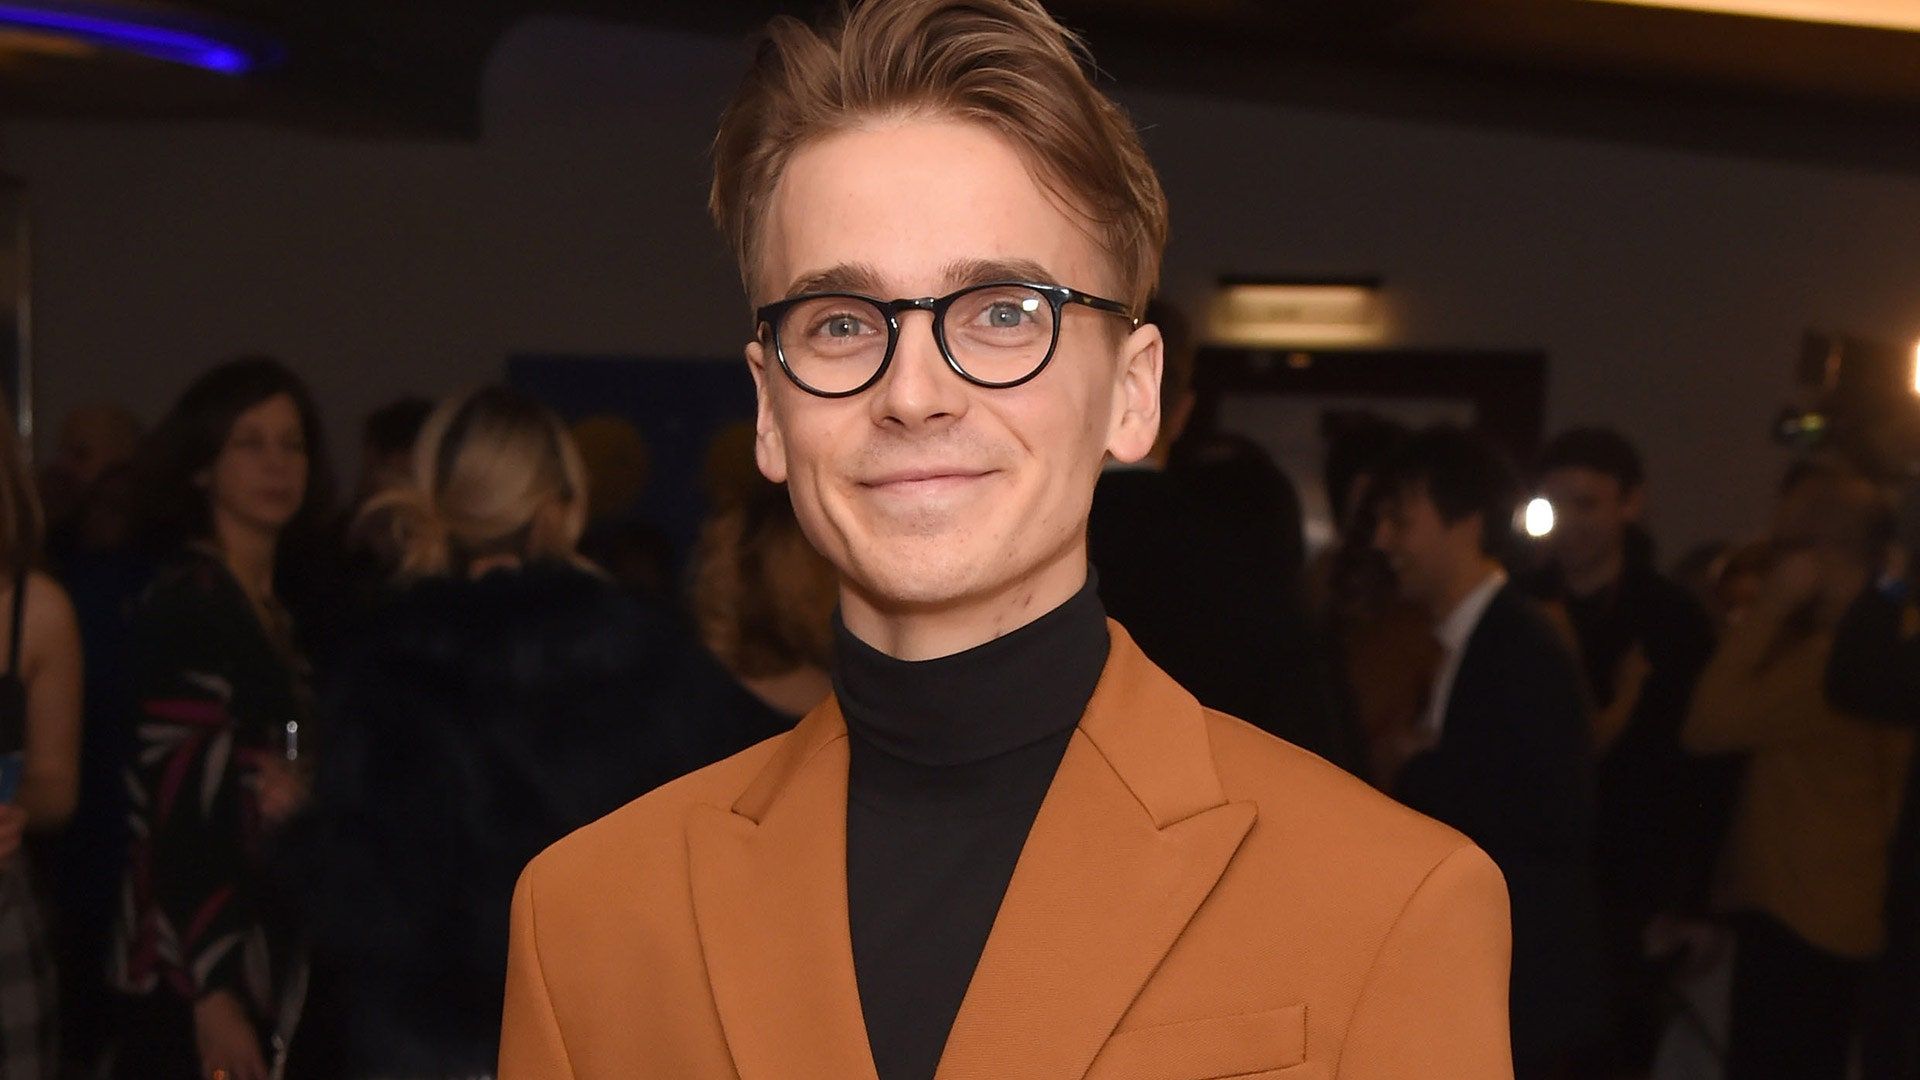 Joe Sugg on his grooming regimen, staying fit and keeping anxiety at bay